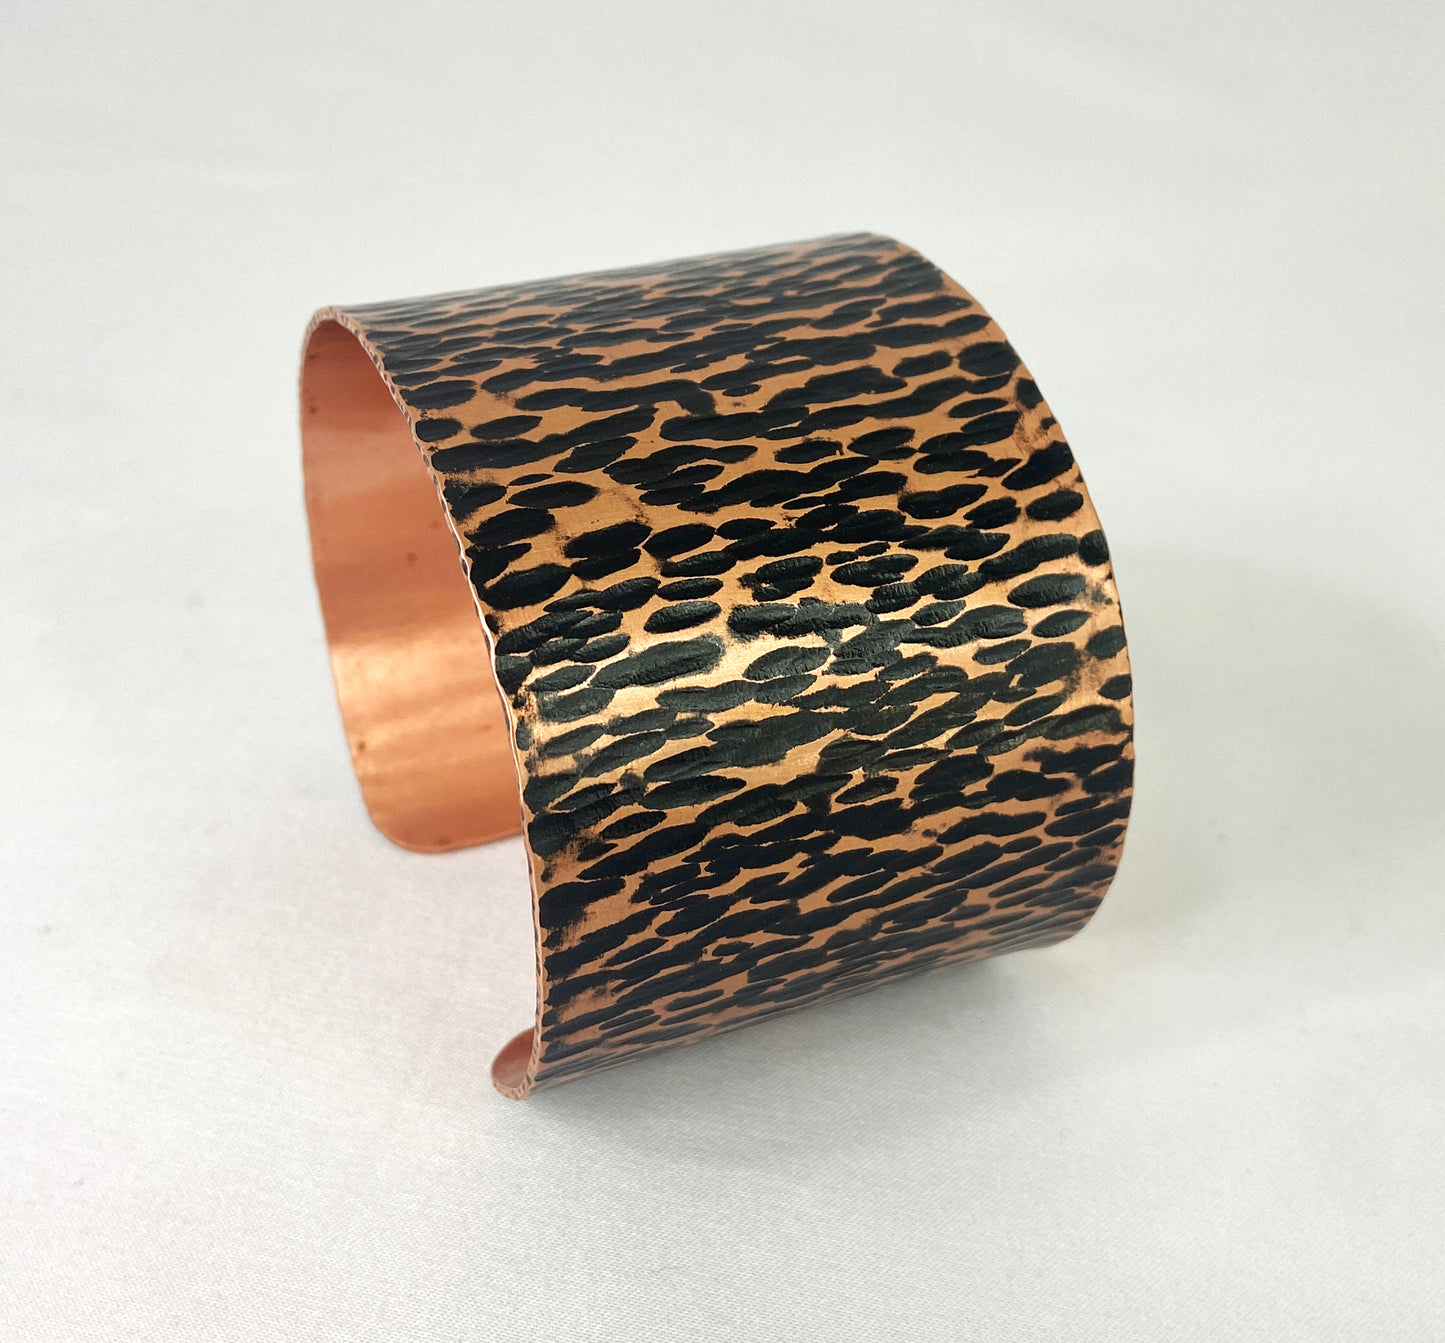 Hammered Copper Cuff with Antique Patina and Cross Peen pattern